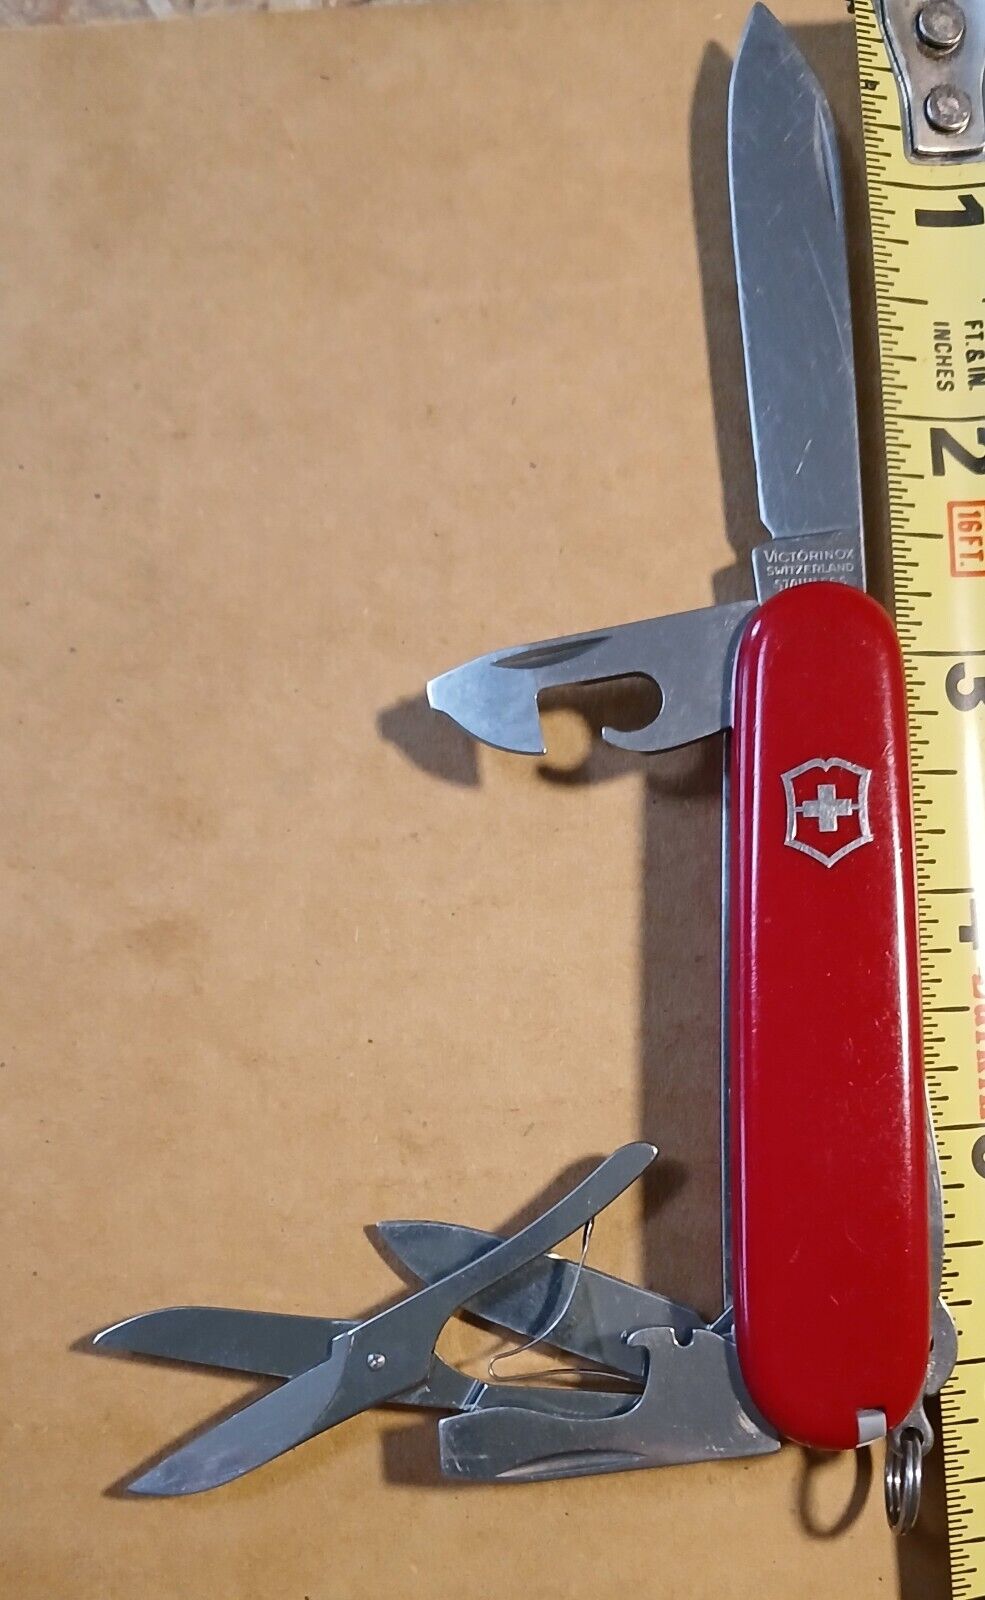 Vintage Victorinox Super Tinker Swiss Army Knife Red 91mm Excellent